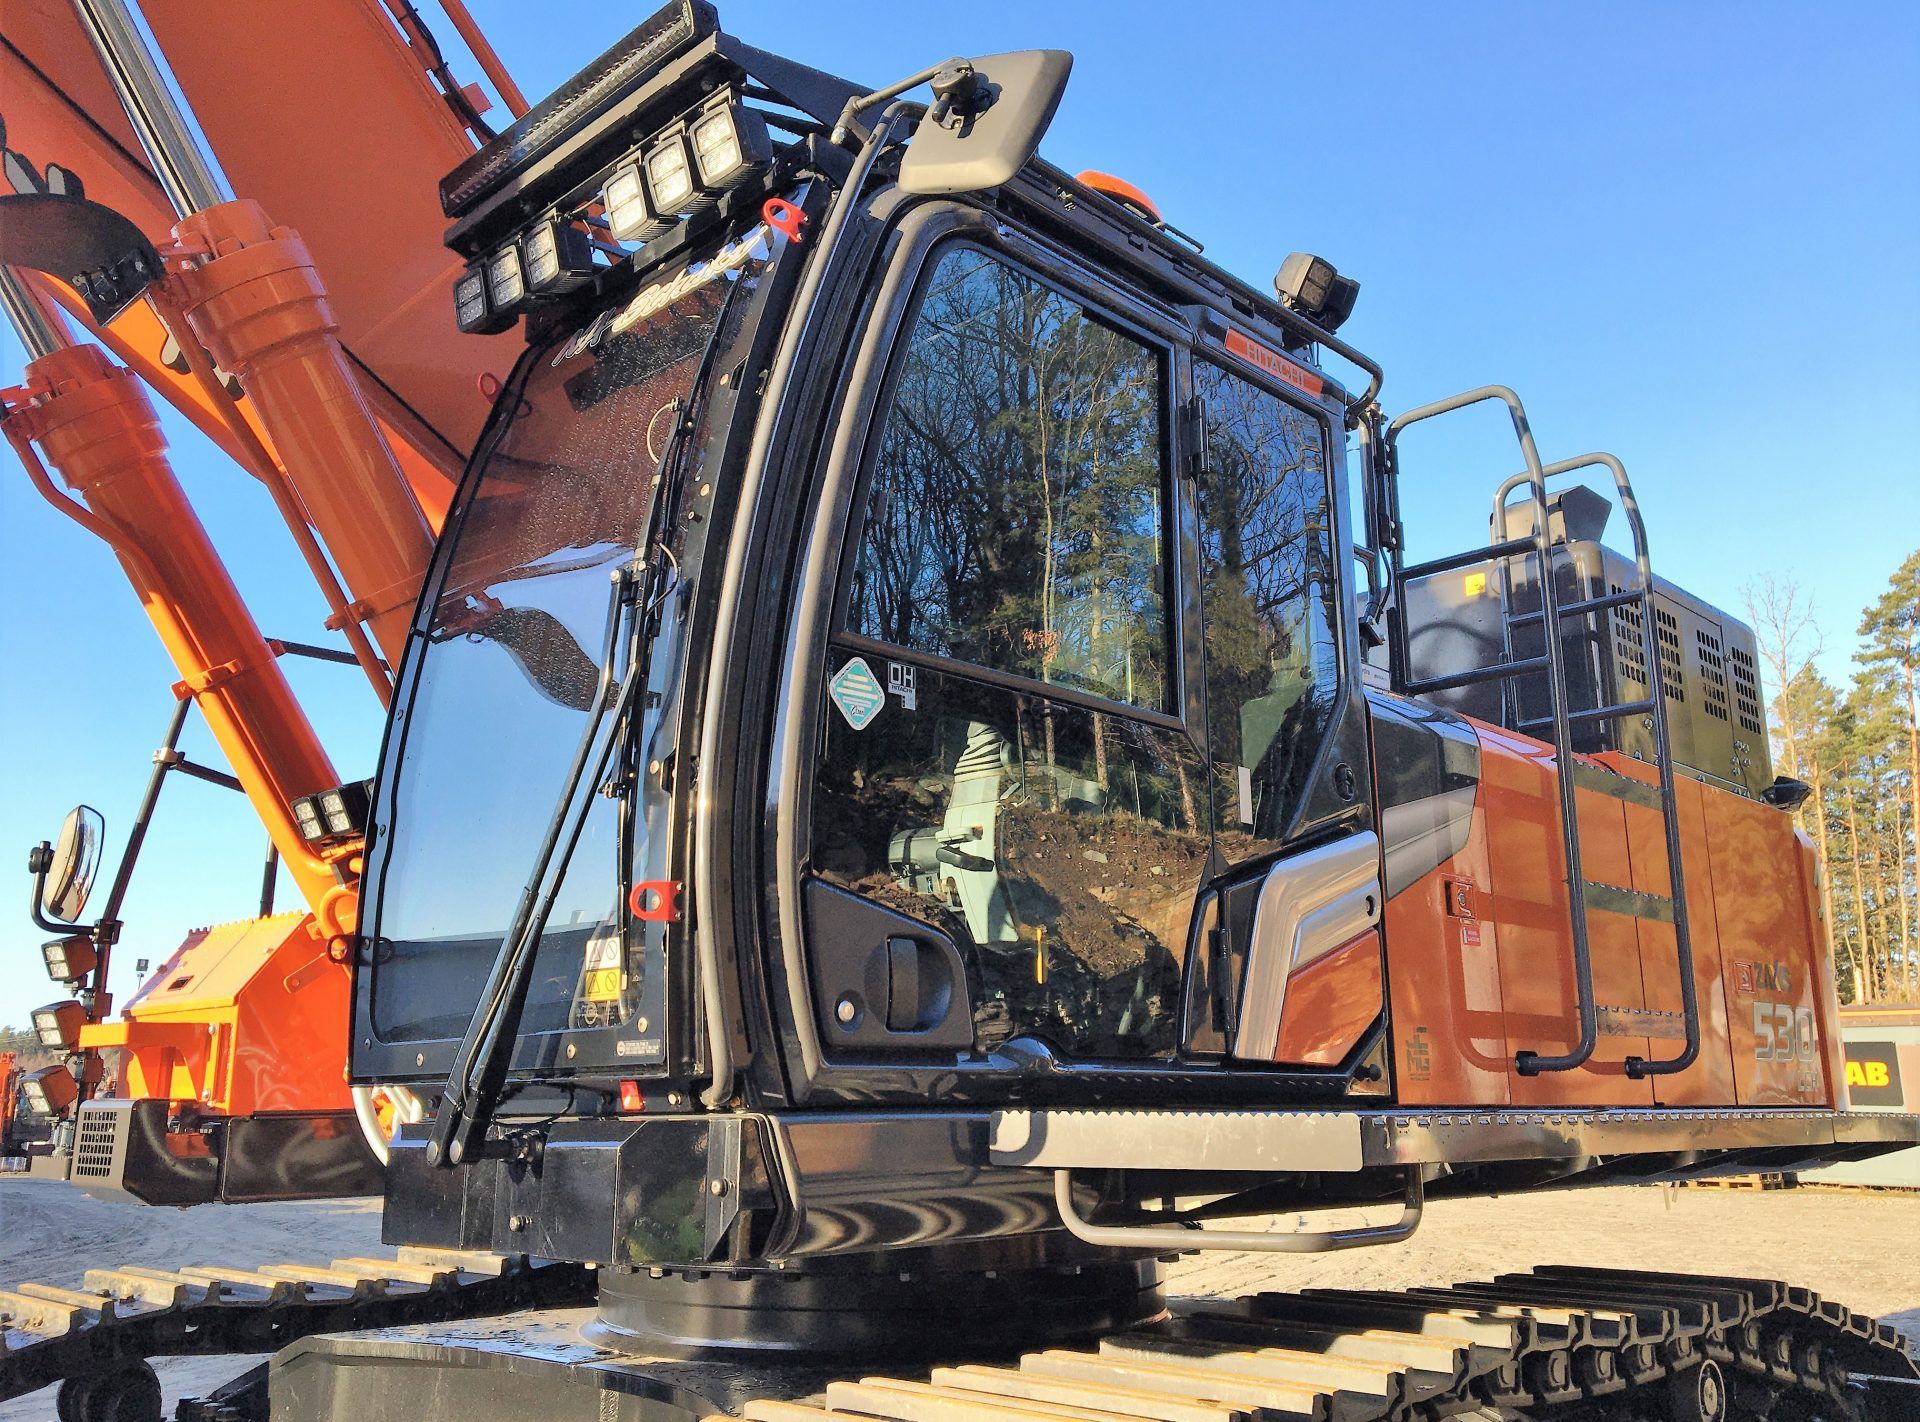 Hitachi Large Excavator Model ZX530LCH-7 at Work in Sweden | The 